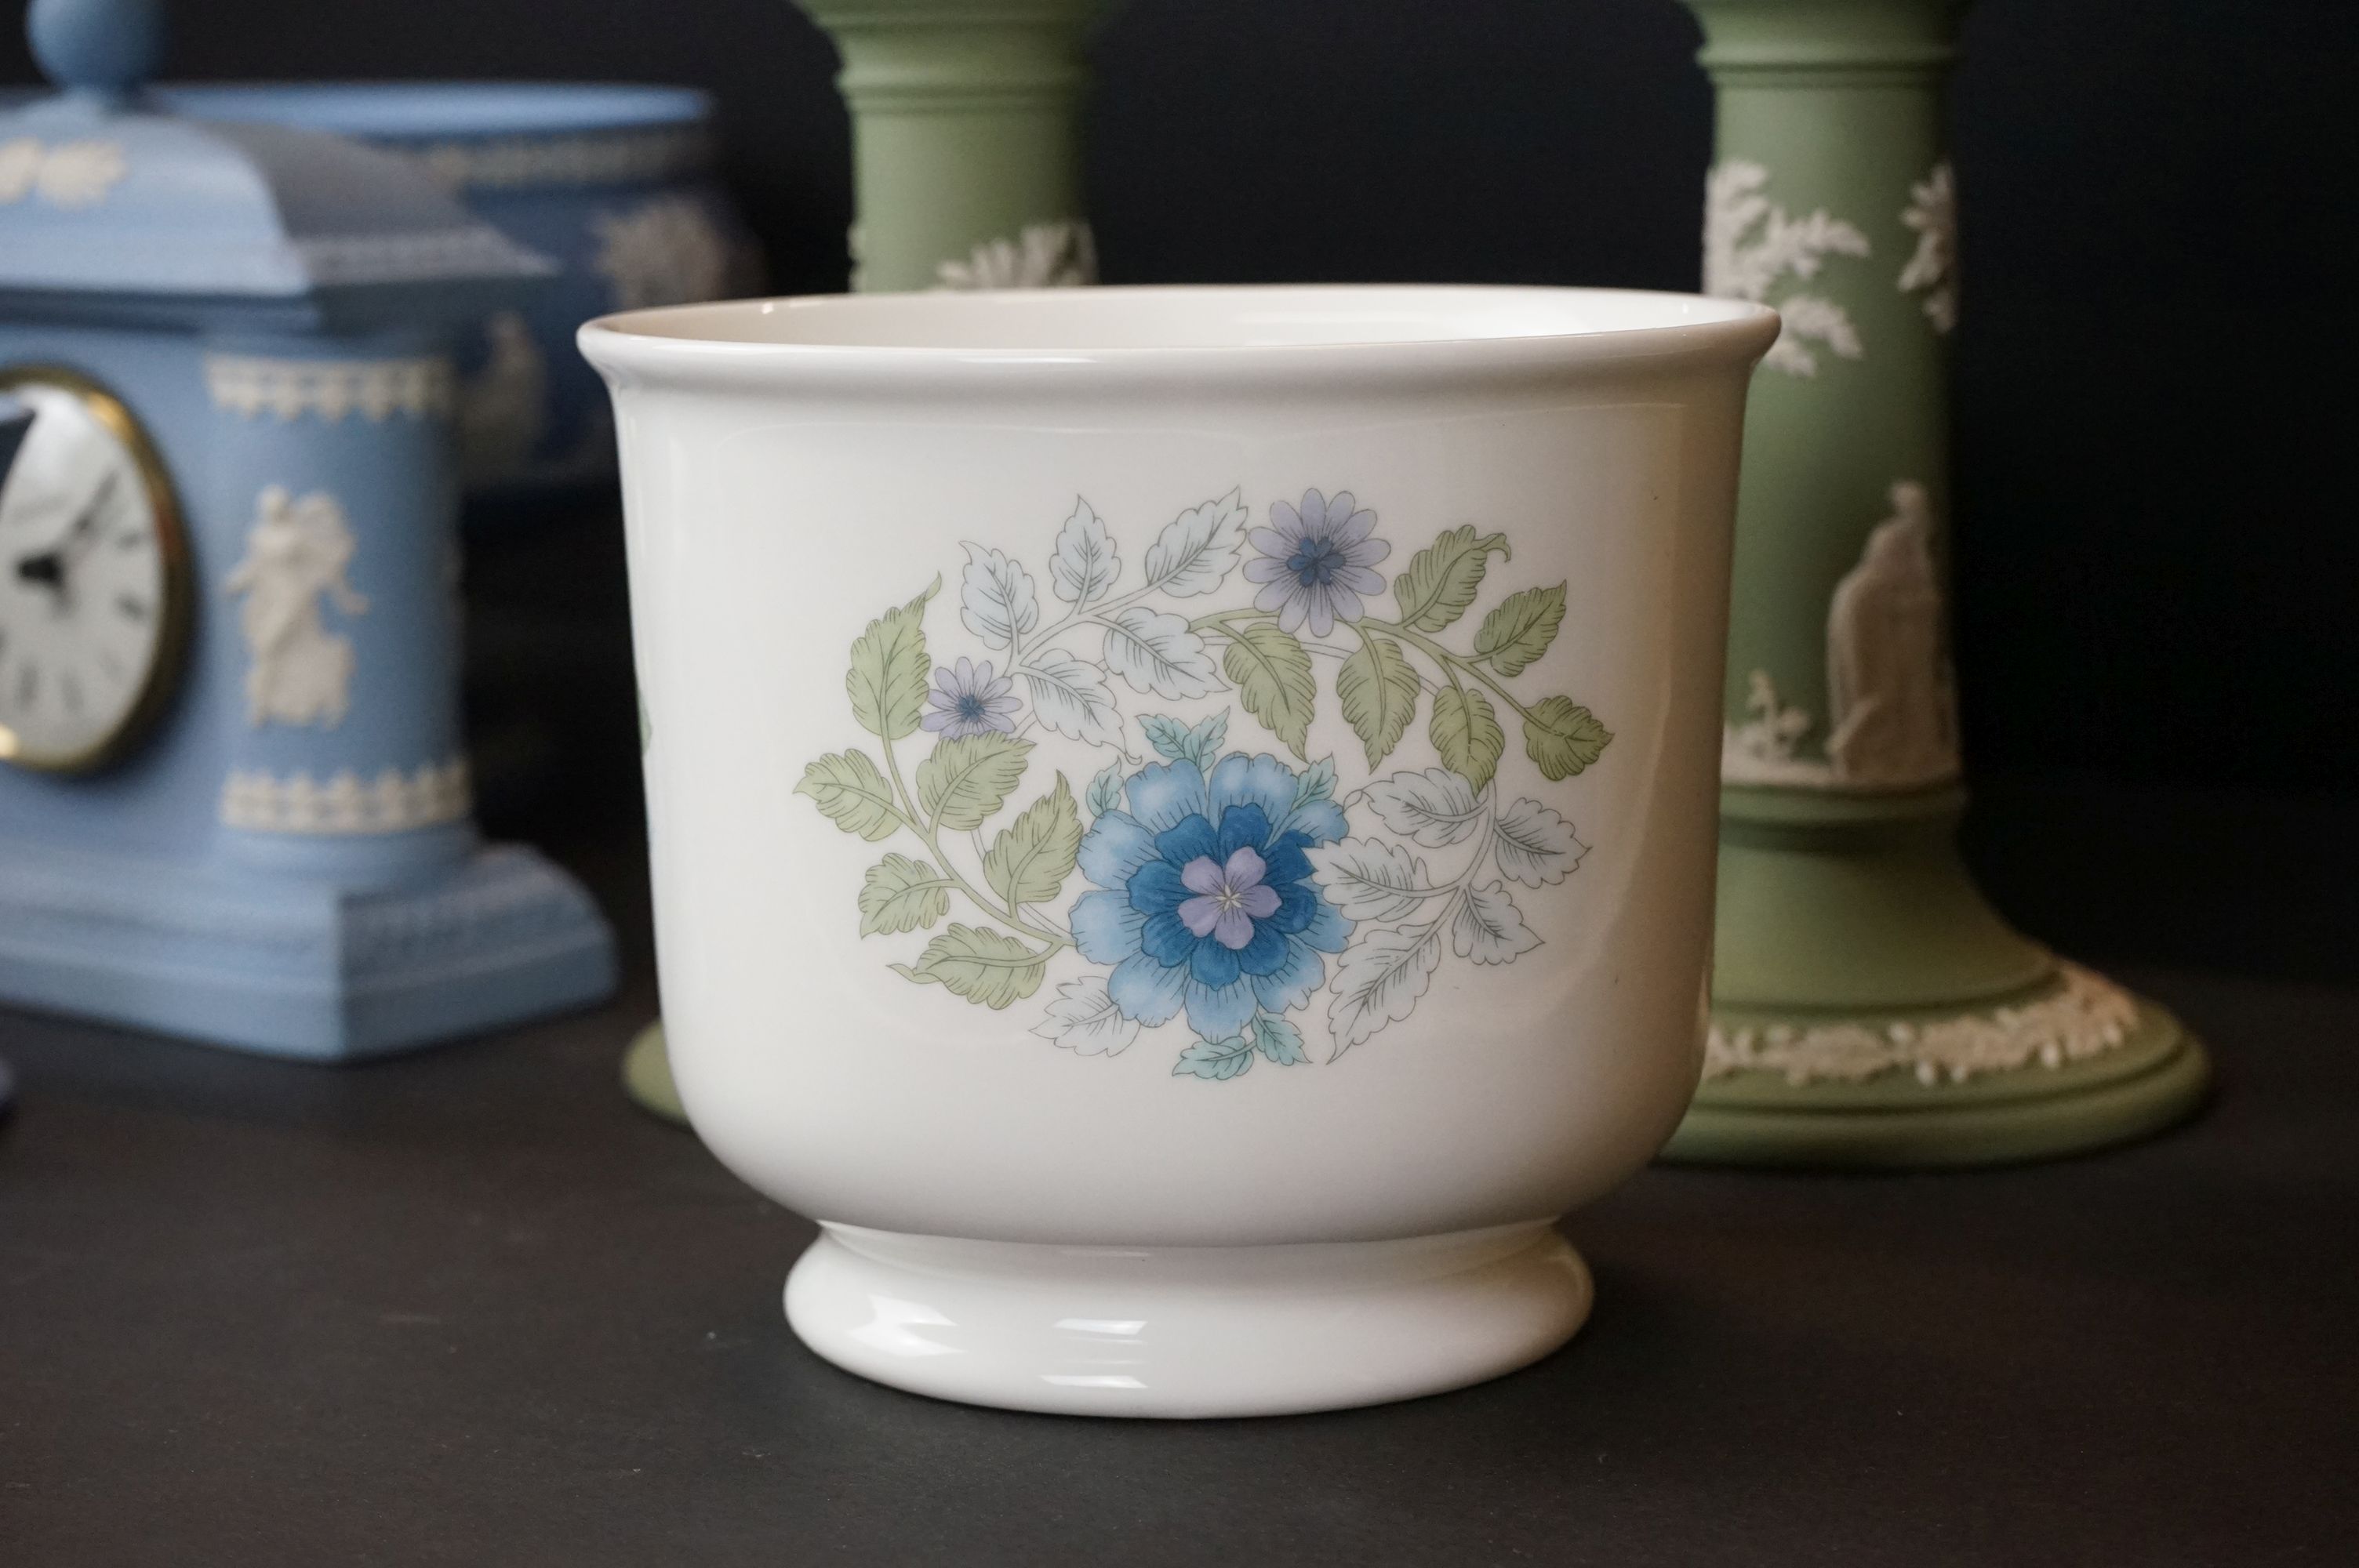 Quantity of Wedgwood Jasperware - to include a quartz mantle clock, bowl, tazza, a pair of - Image 4 of 8